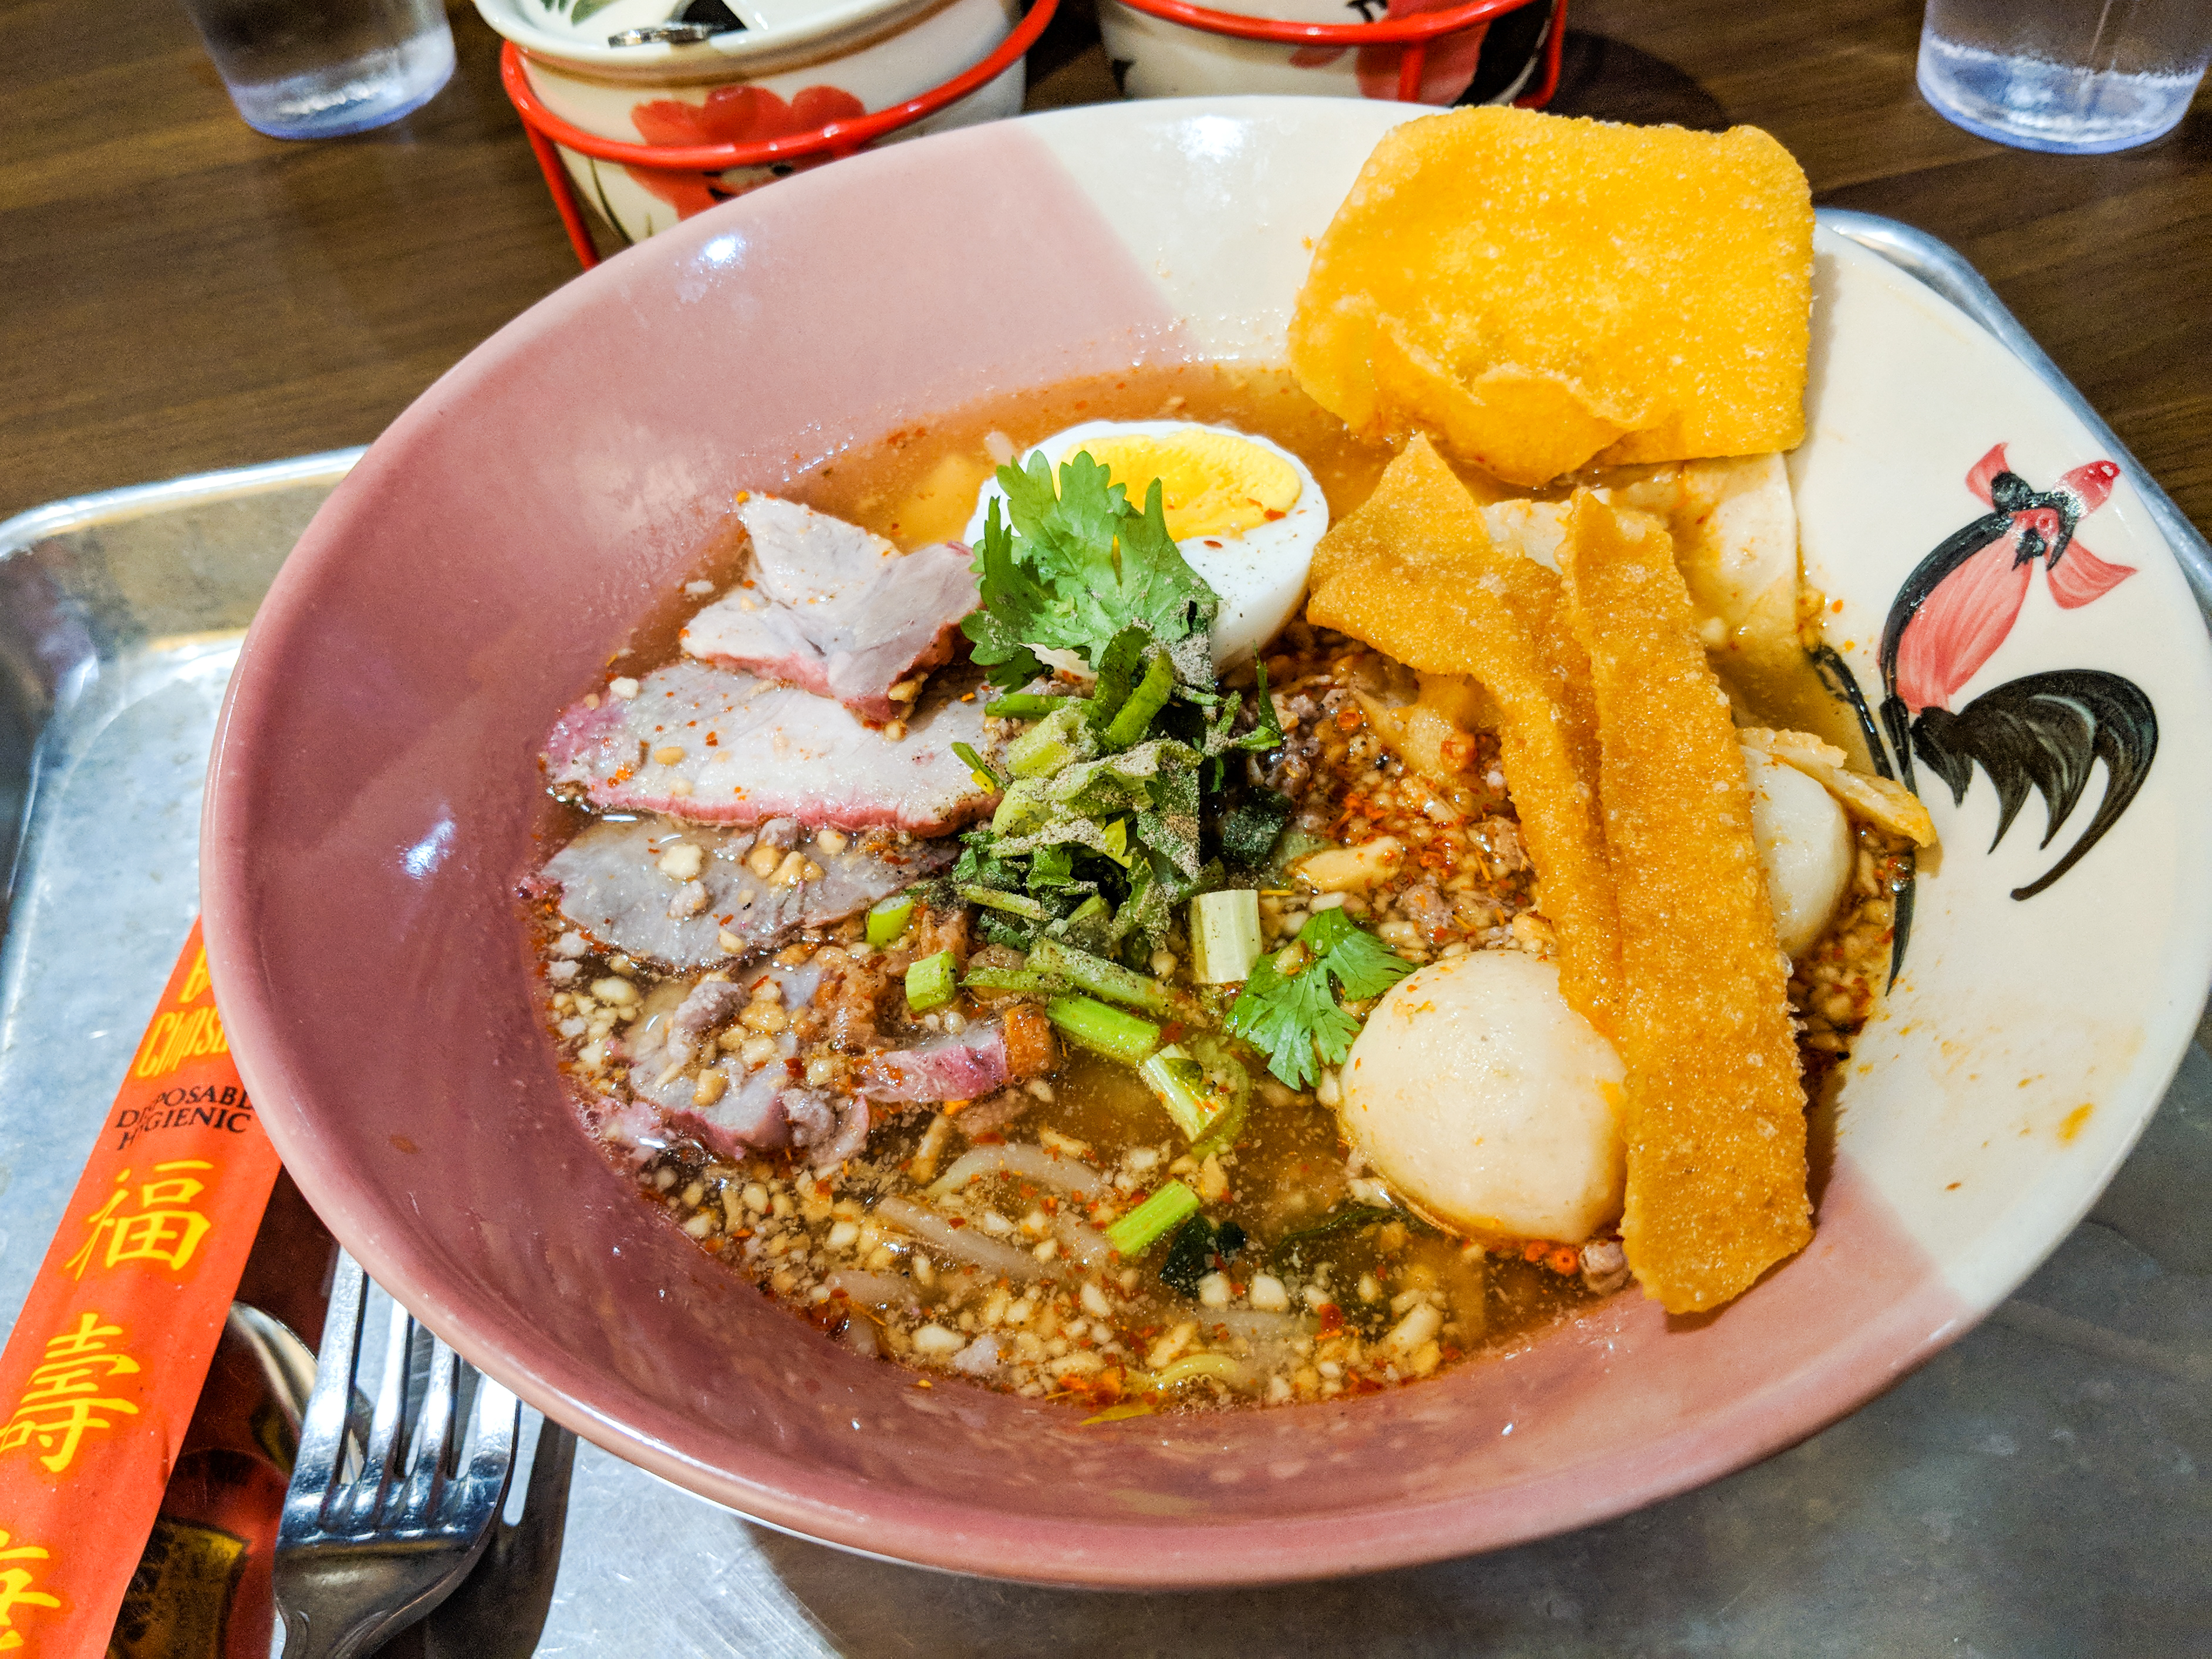 Soup in a Thai-style bowl decorated with a rooster. There are pink barbecue pork slices in the soup, as well as an egg, ground pork, ground peanuts, crispy wonton strips, and more. The bowl sits on a metal tray.